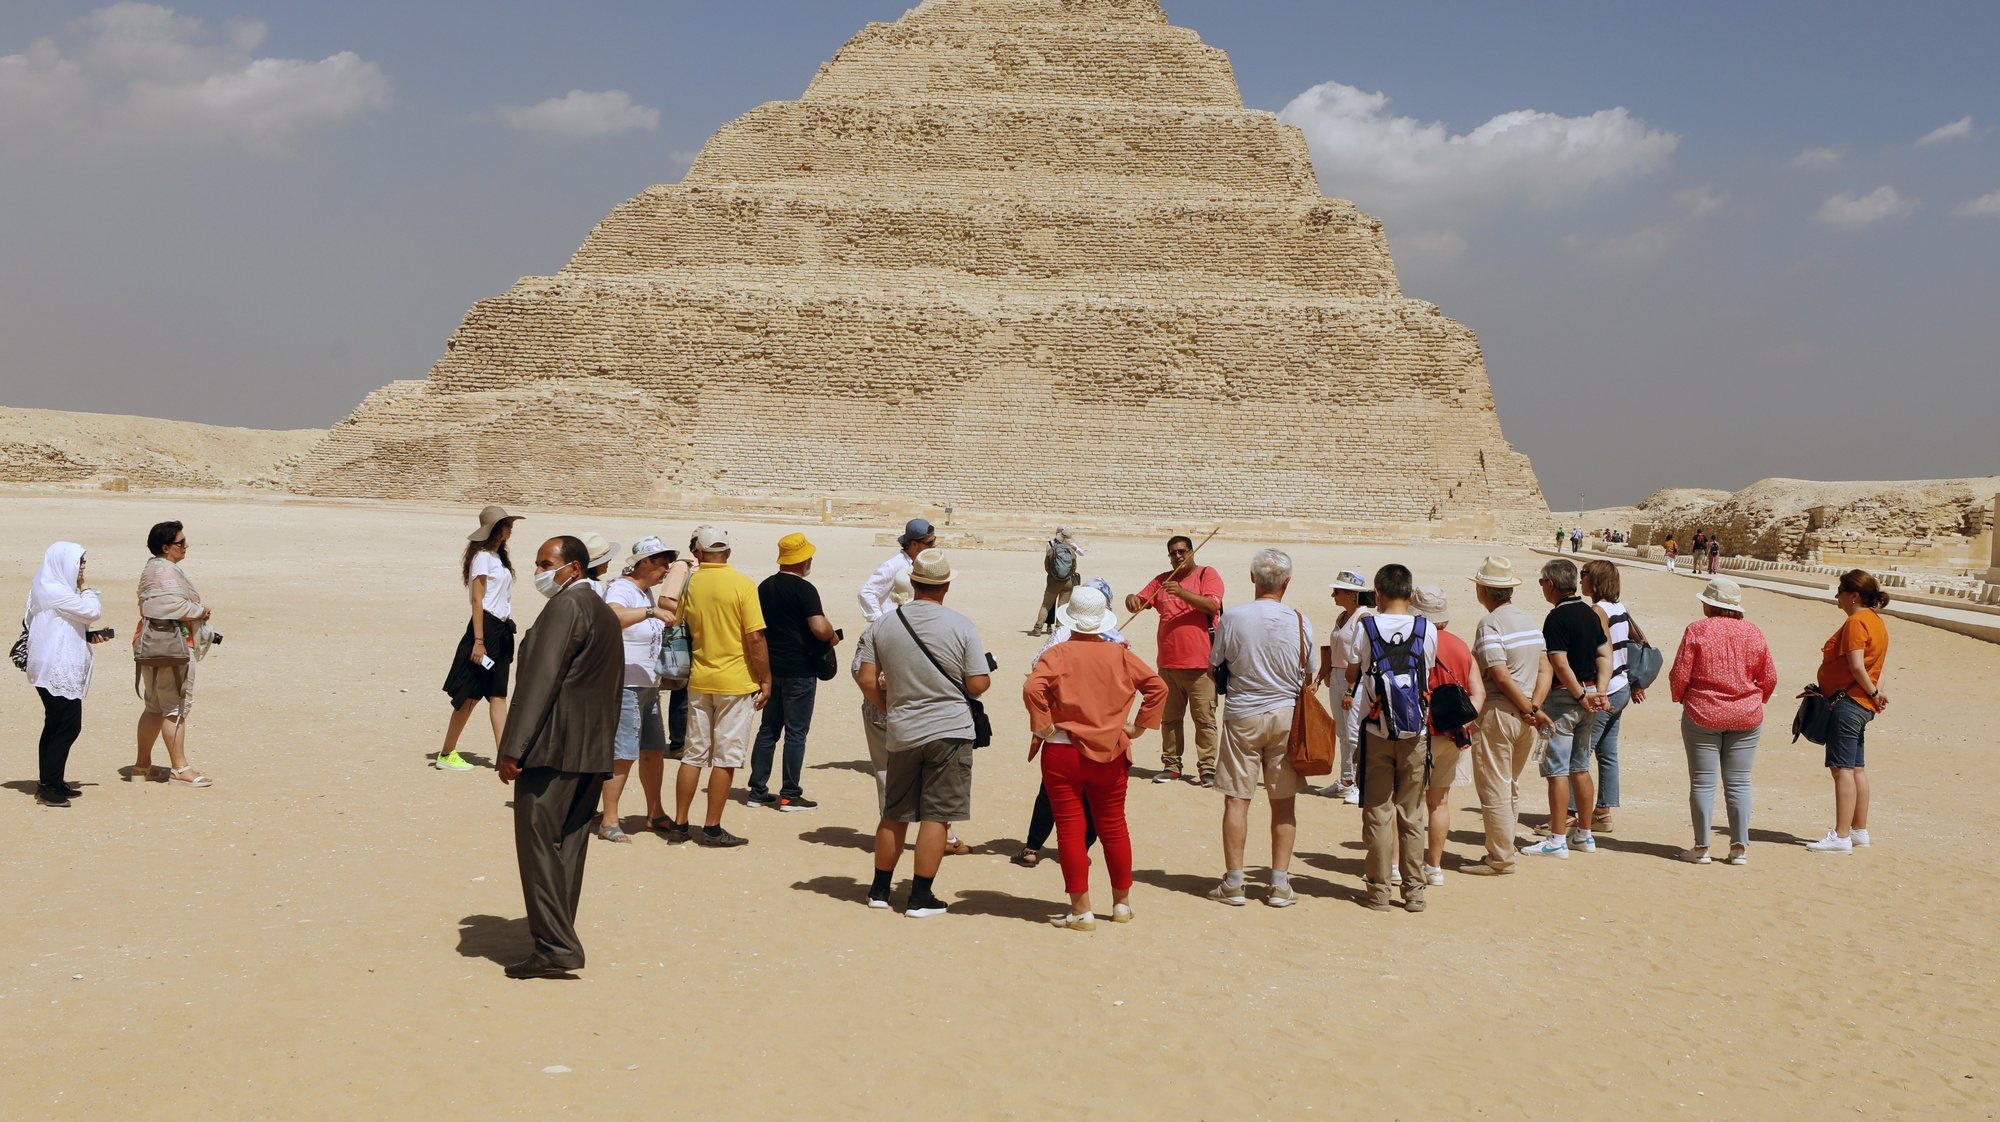 epa09467606 A group of tourists gathers outside Tomb of King Djoser step pyramid, that was reopened for visitors after a restoration, in the Saqqara area, near Giza, Egypt, 14 September 2021. An information plate by the Ministry of Tourism &amp; Antiques at the entrance of the site describes the ancient Southern Tomb step pyramid, also known as the Saqqara pyramid, as being &#039;the oldest stone building of the ancient world&#039; which was &#039;discovered by the English archaeologist Cecil Malaby Firth in 1928.&#039; A series of corridors with even some false doors are described as the &#039;most important architectual and decorative elements&#039; in the tomb that also features a 7.5 x 7.5m burial chamber at a depth of some 31 meters with a sarcophagus made of 16 blocks of pink granite and a height of about 3.6 meters.  EPA/KHALED ELFIQI  HANDOUT EDITORIAL USE ONLY/NO SALES